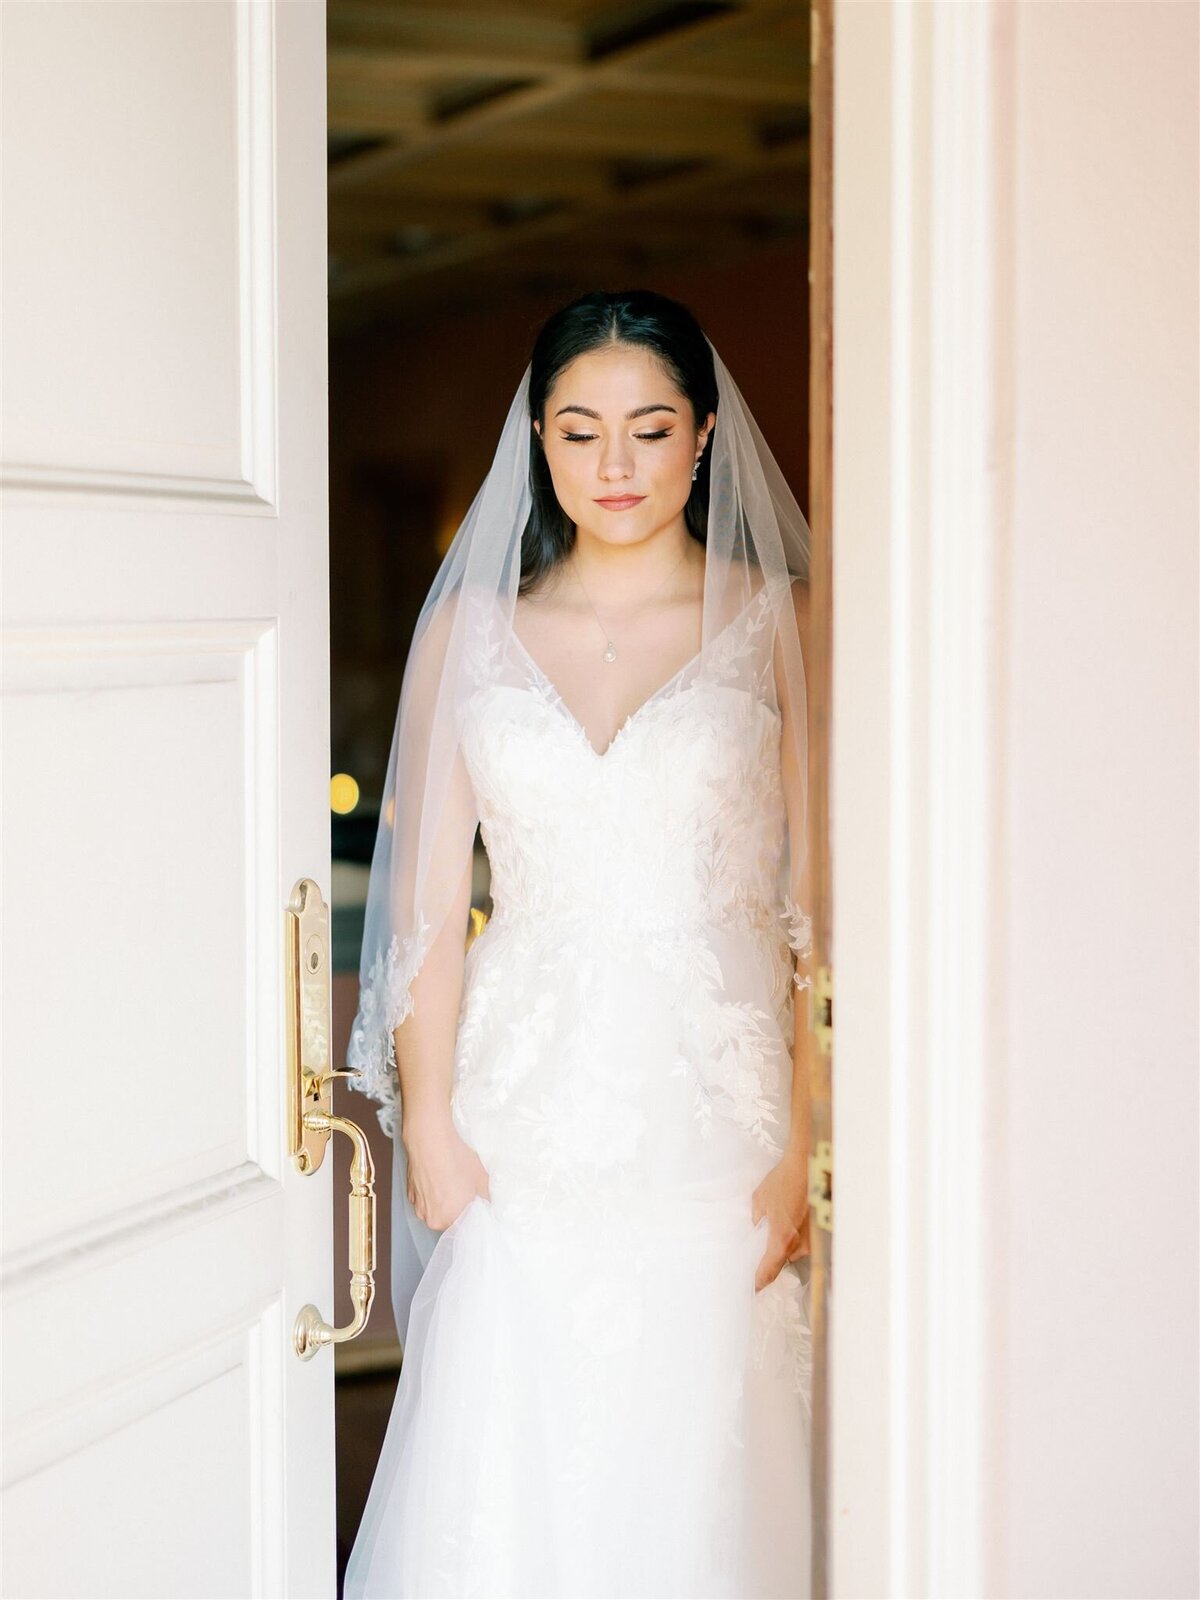 A bride in a white dress stands in the doorway of a room.